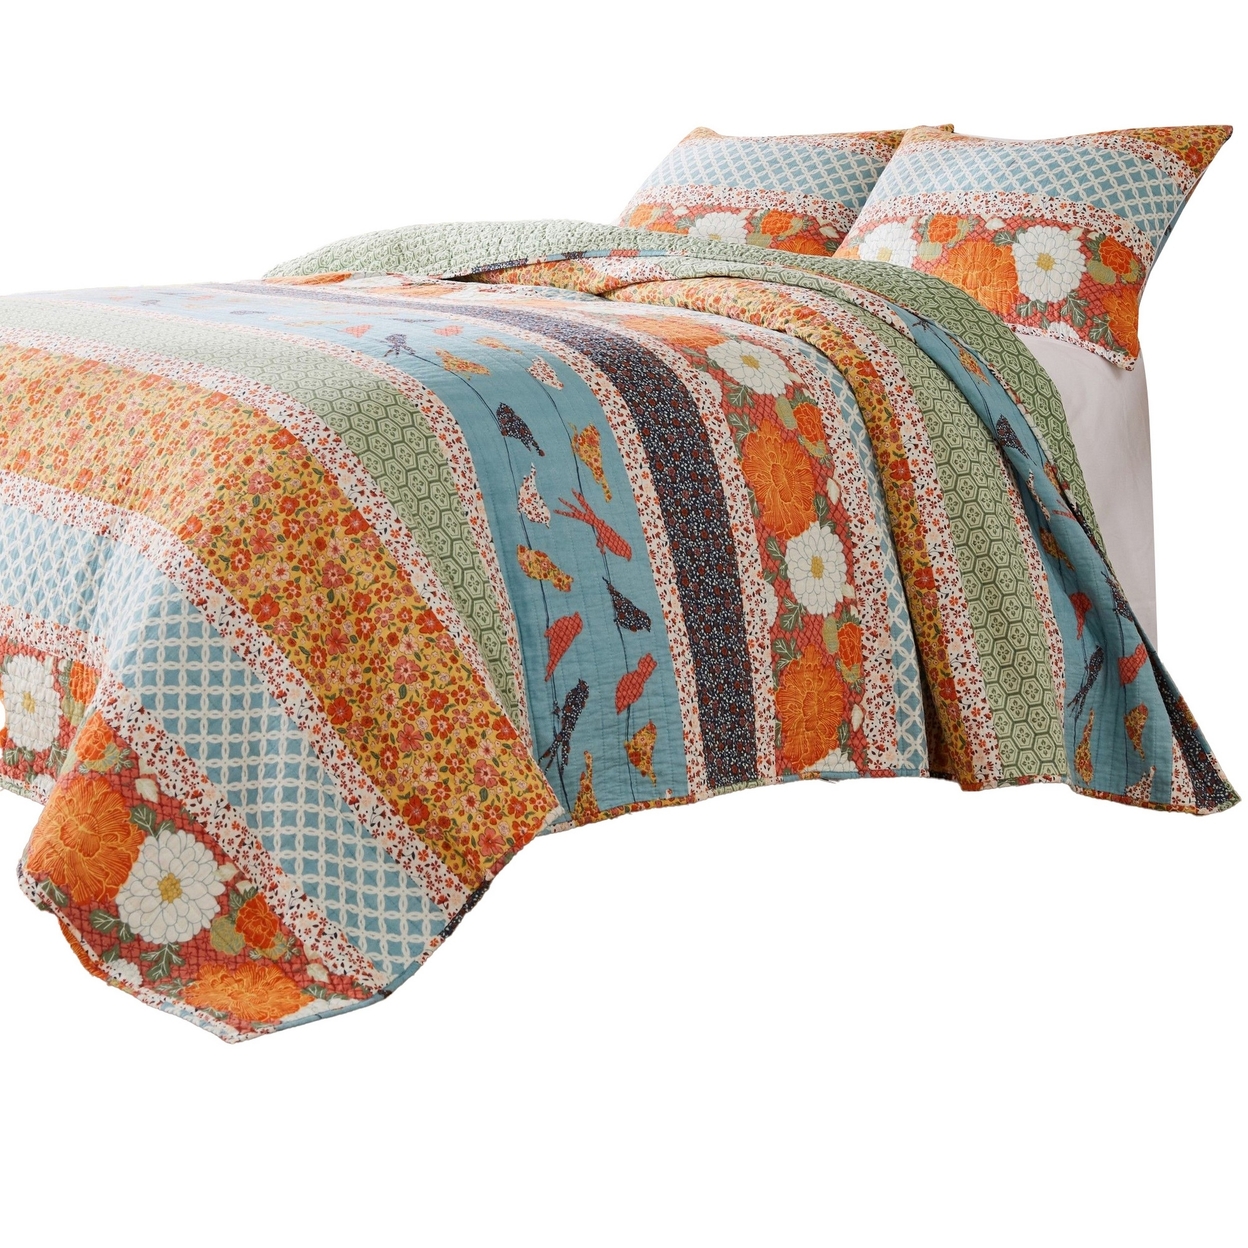 2pc Twin Quilt And Pillow Sham Set, Floral And Songbirds Prints, Multicolor-Saltoro Sherpi